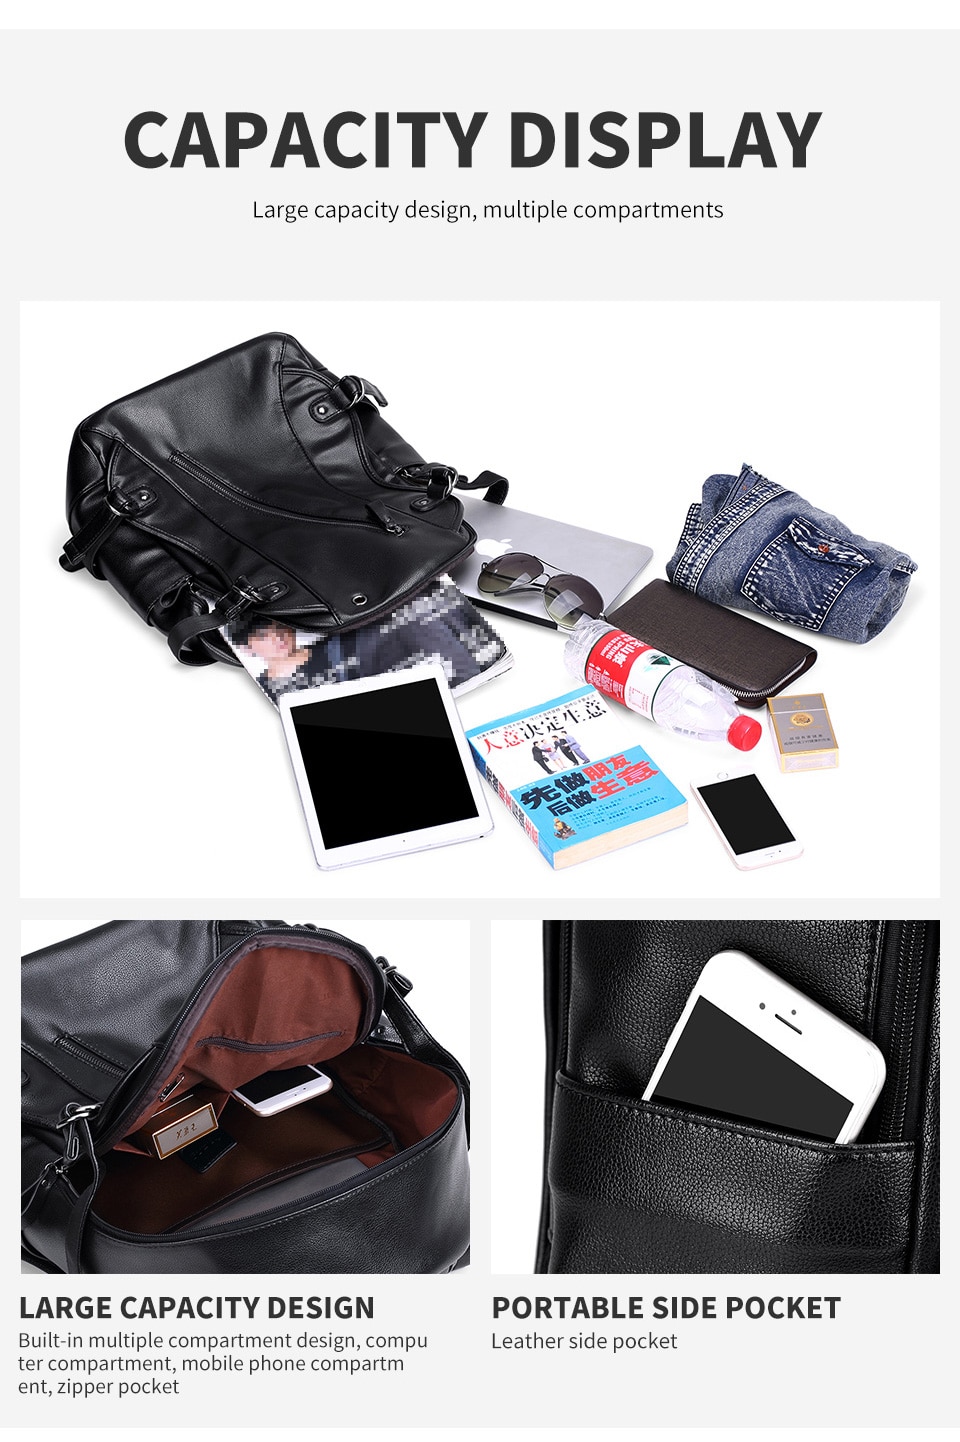 LIELANG-Men-Backpack-External-USB-Charge-Waterproof--Backpack-Fashion-PU-Leather-Travel-Bag-Casual-S-32876462480